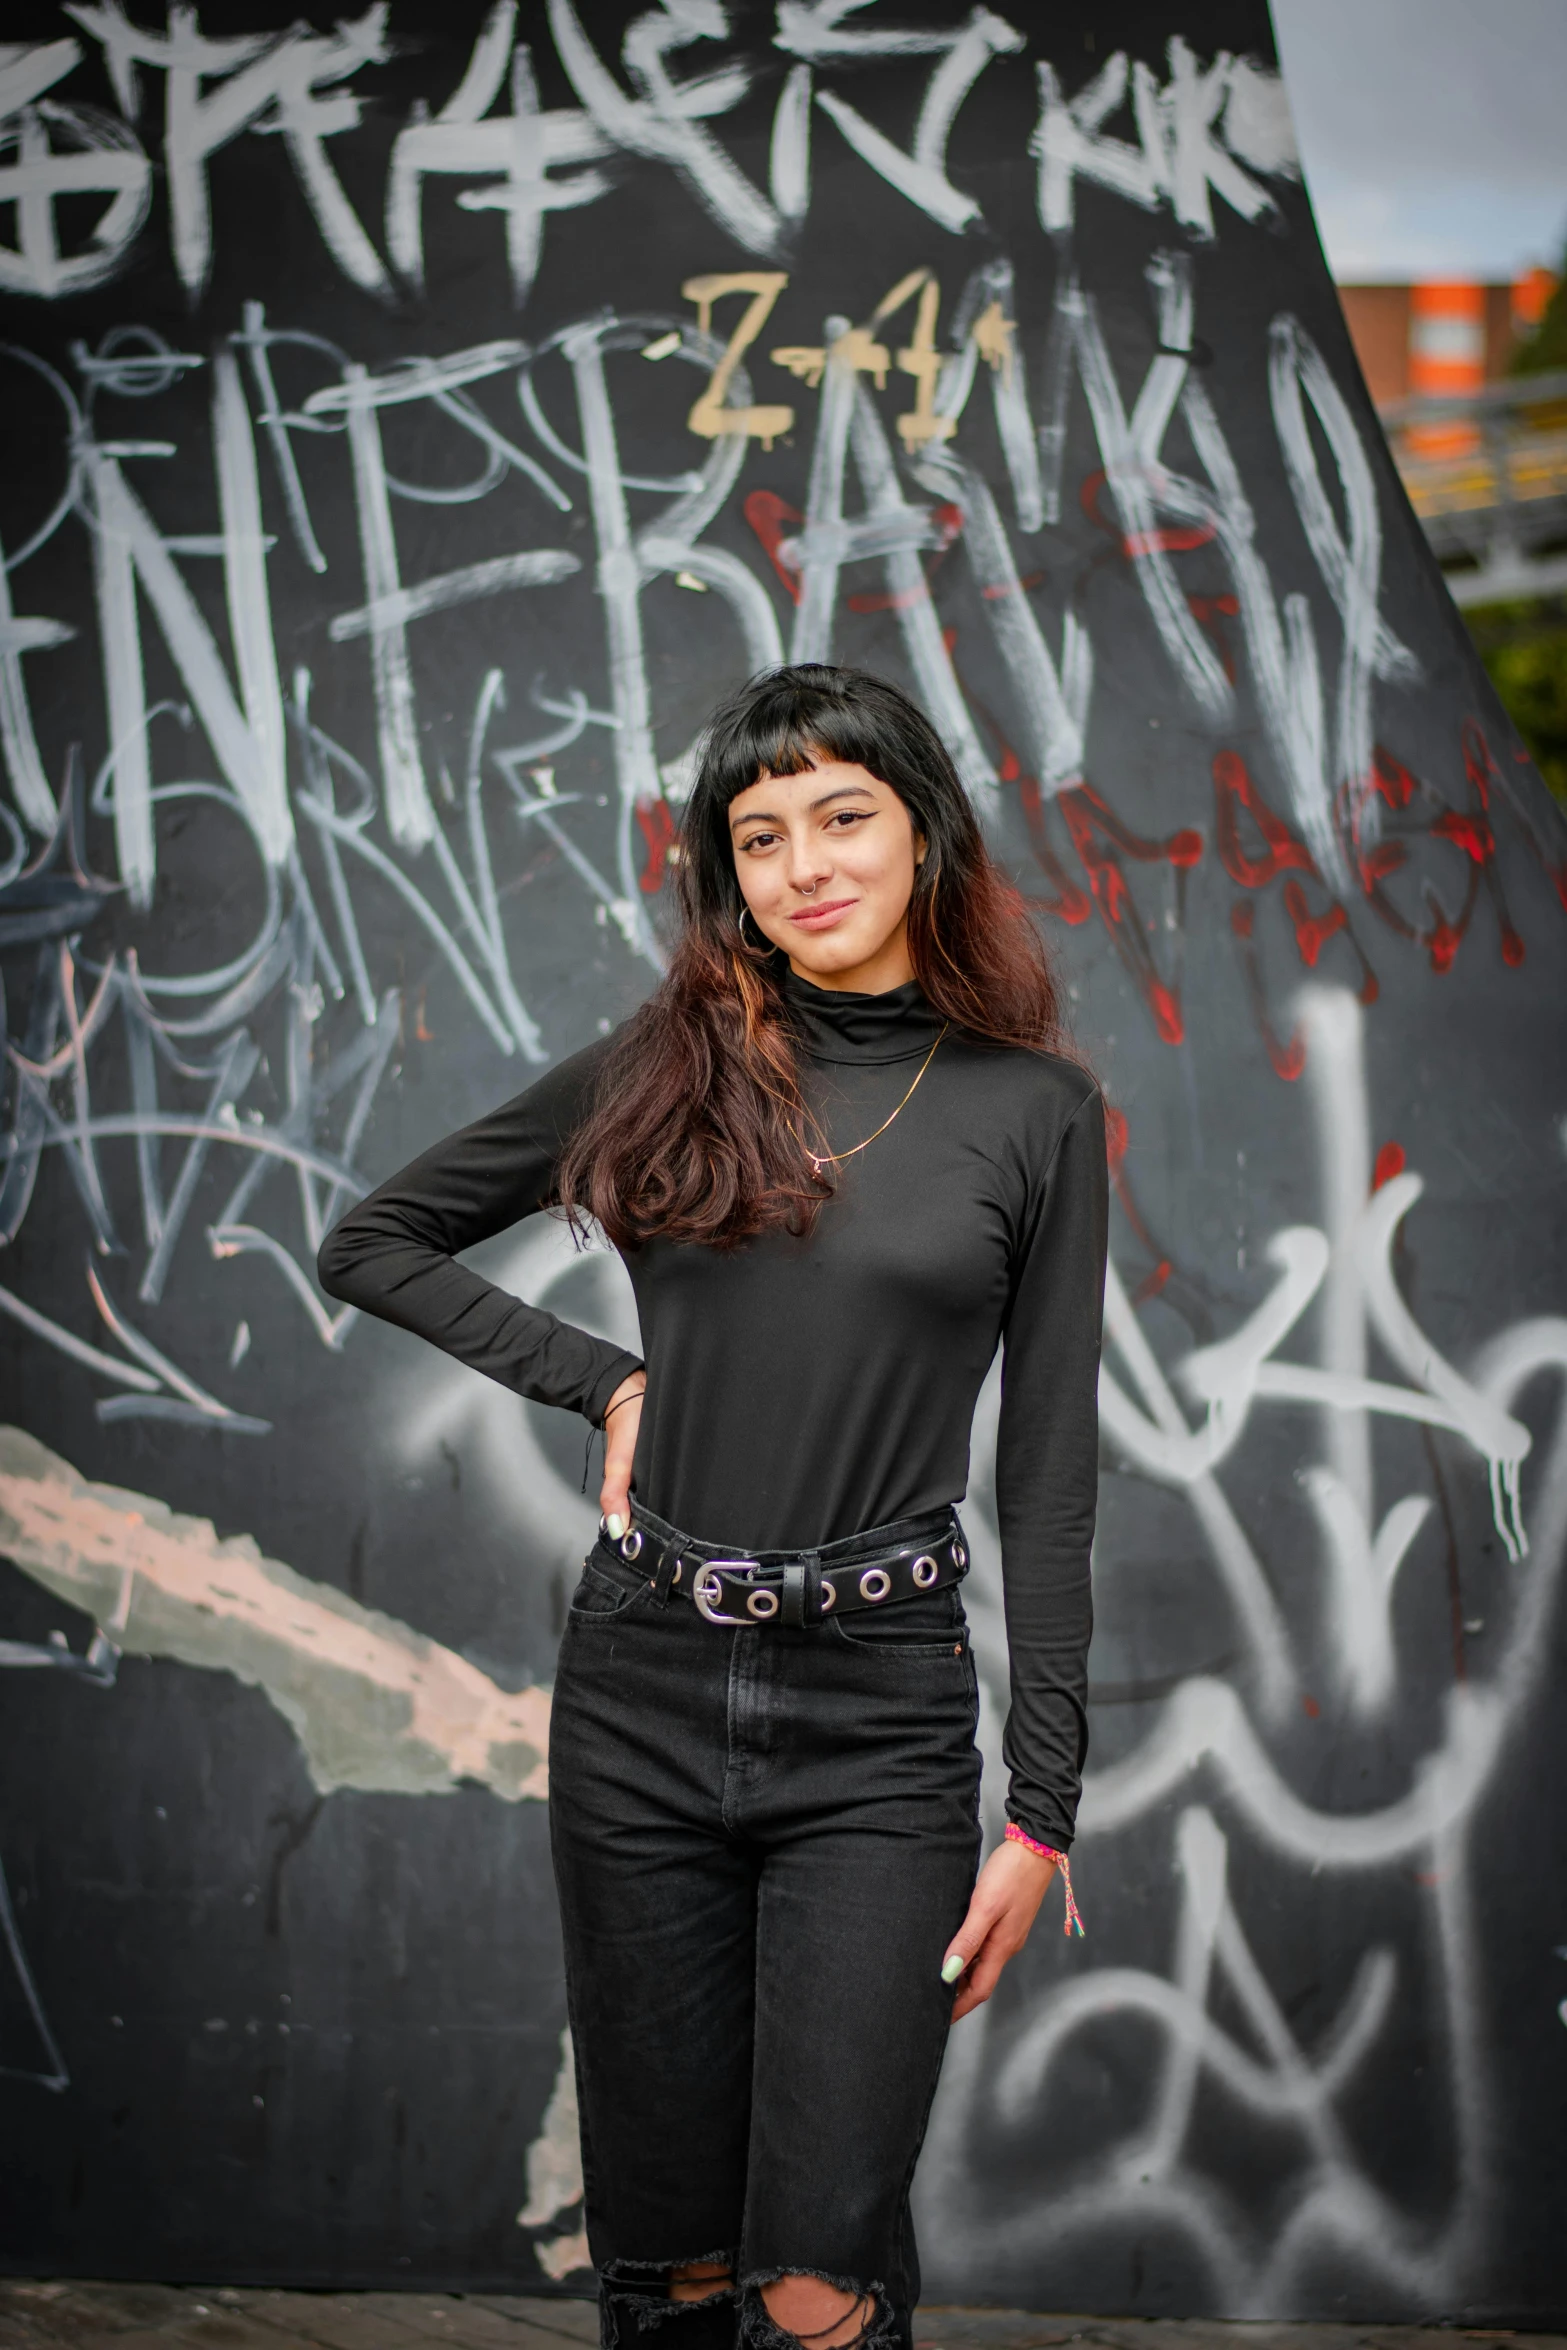 a woman standing next to a wall with graffiti